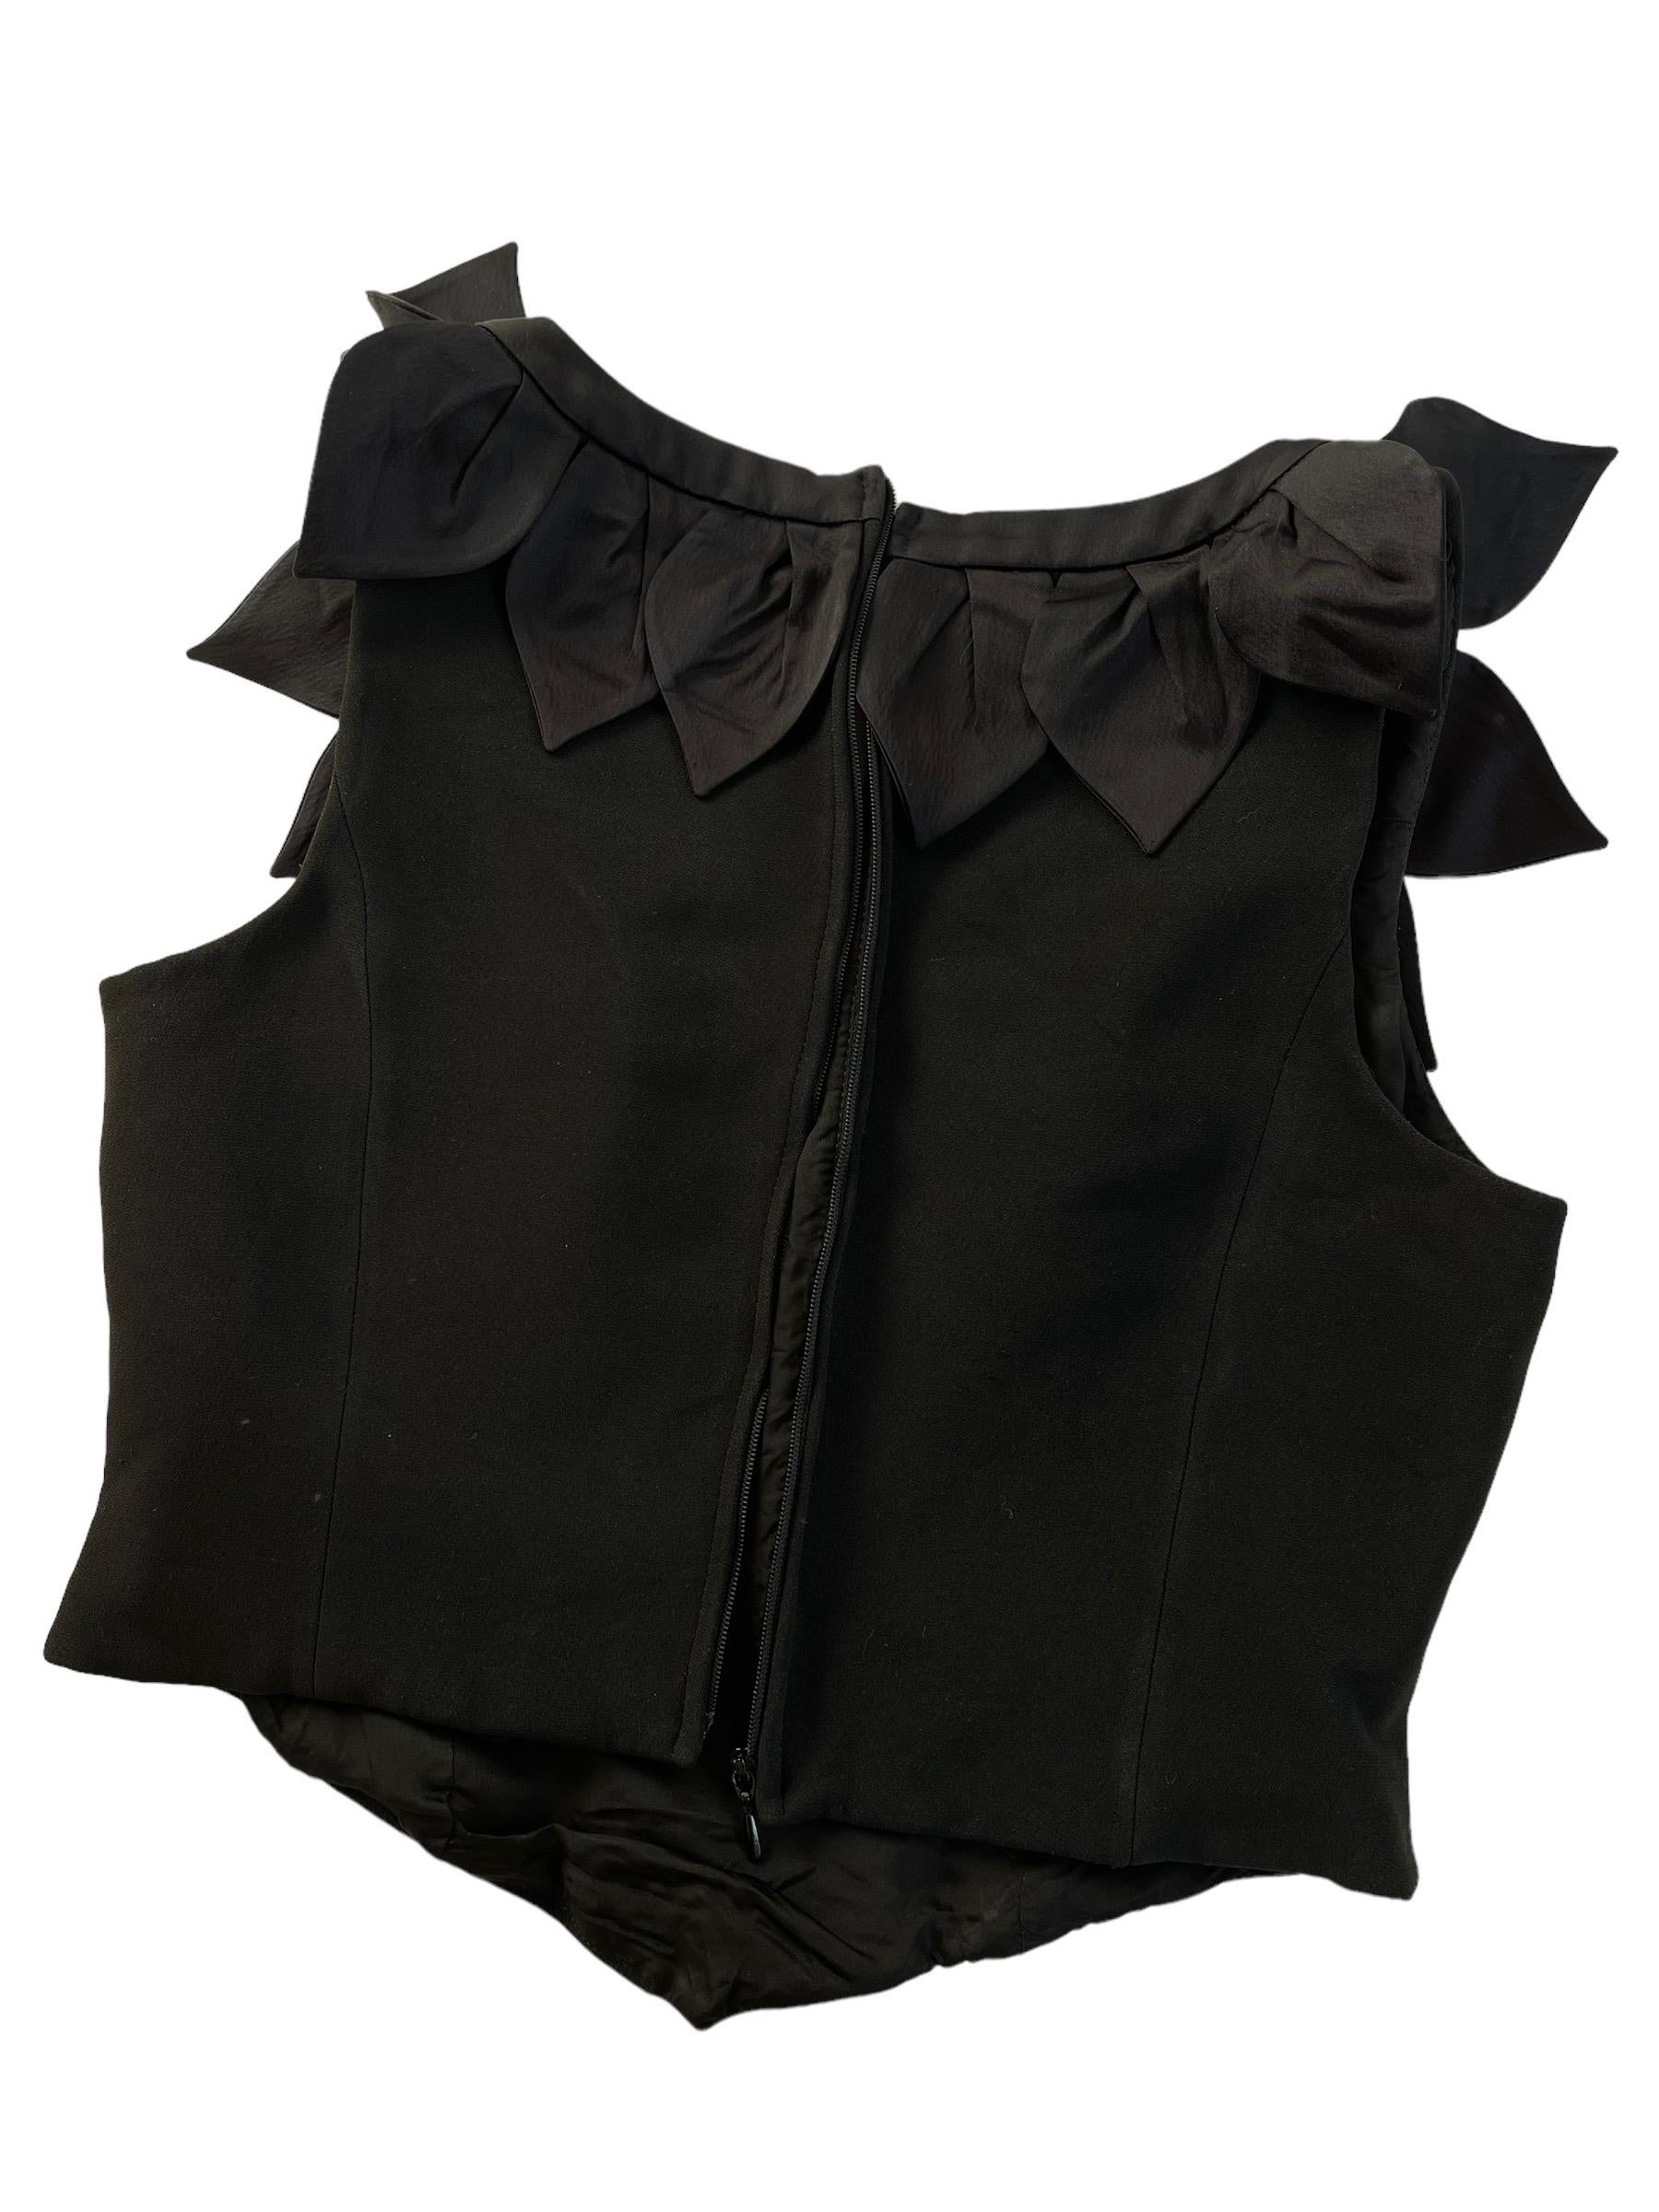 Moschino Cheap and Chic Petals Black Corset Top Vintage 1990s   5